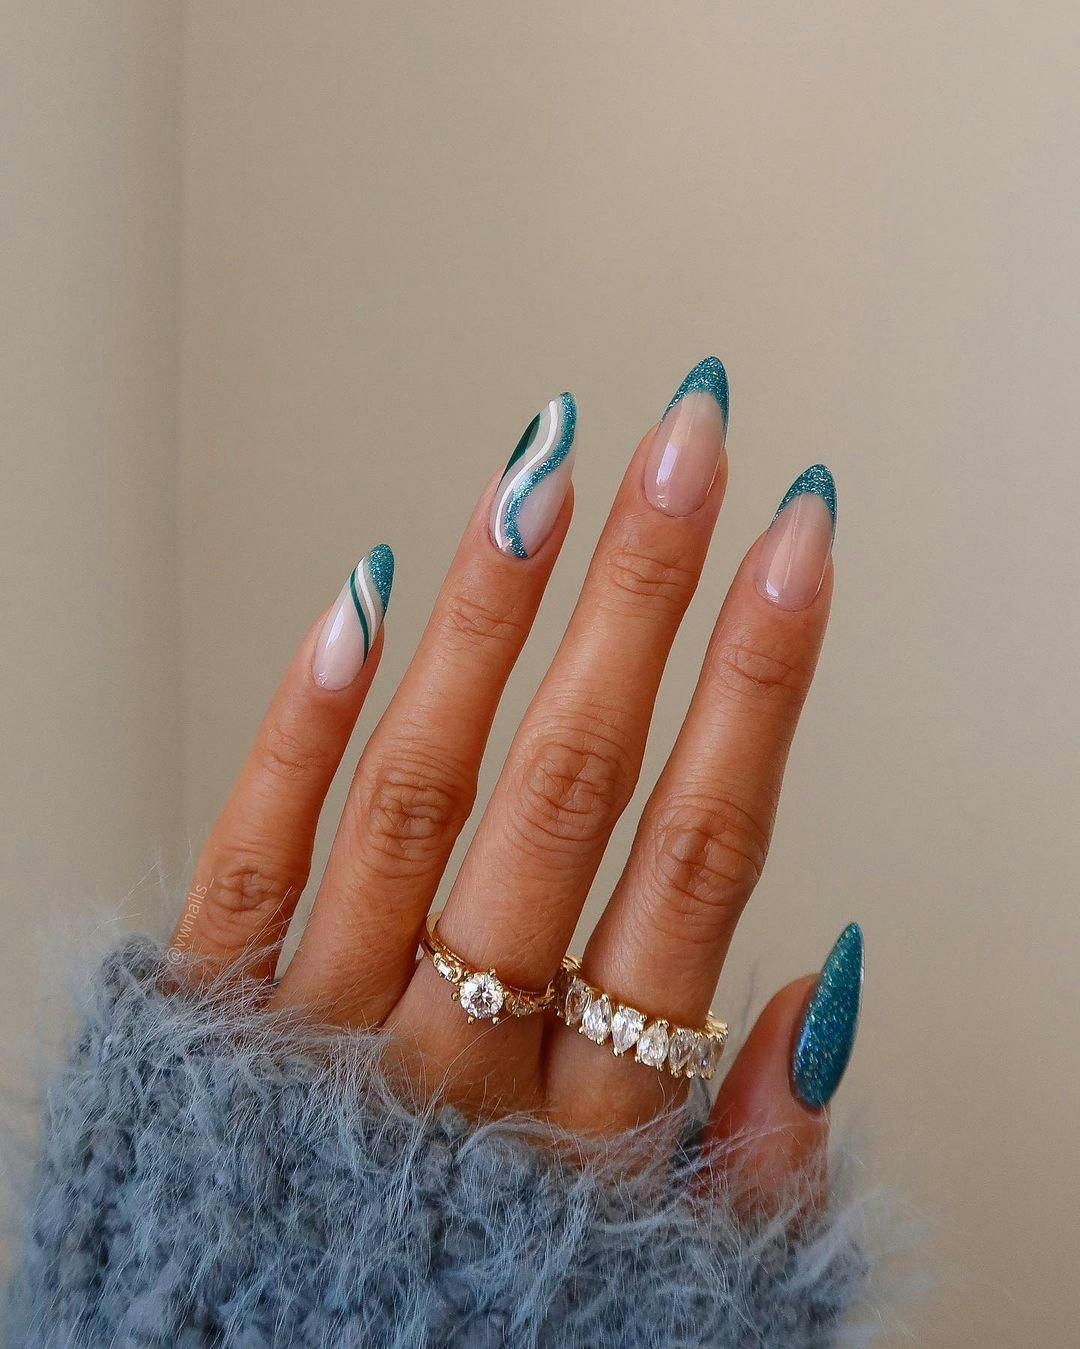 7 nail designs in neutral tones for a subtle manicure